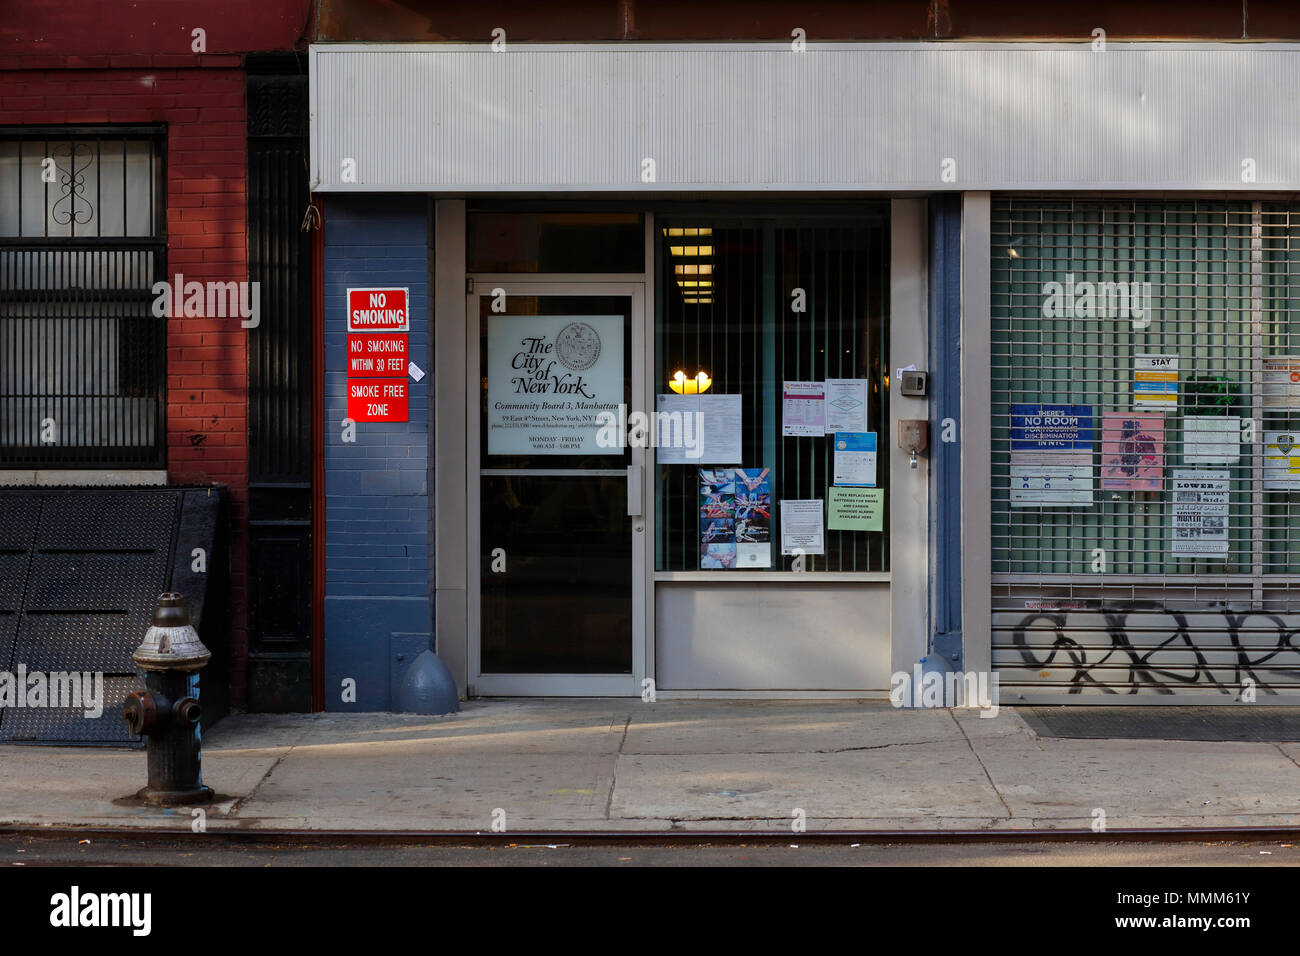 Manhattan Community Board 3, 59 E 4th St, New York, NY. exterior storefront of an office in the East Village neighborhood of Manhattan. Stock Photo